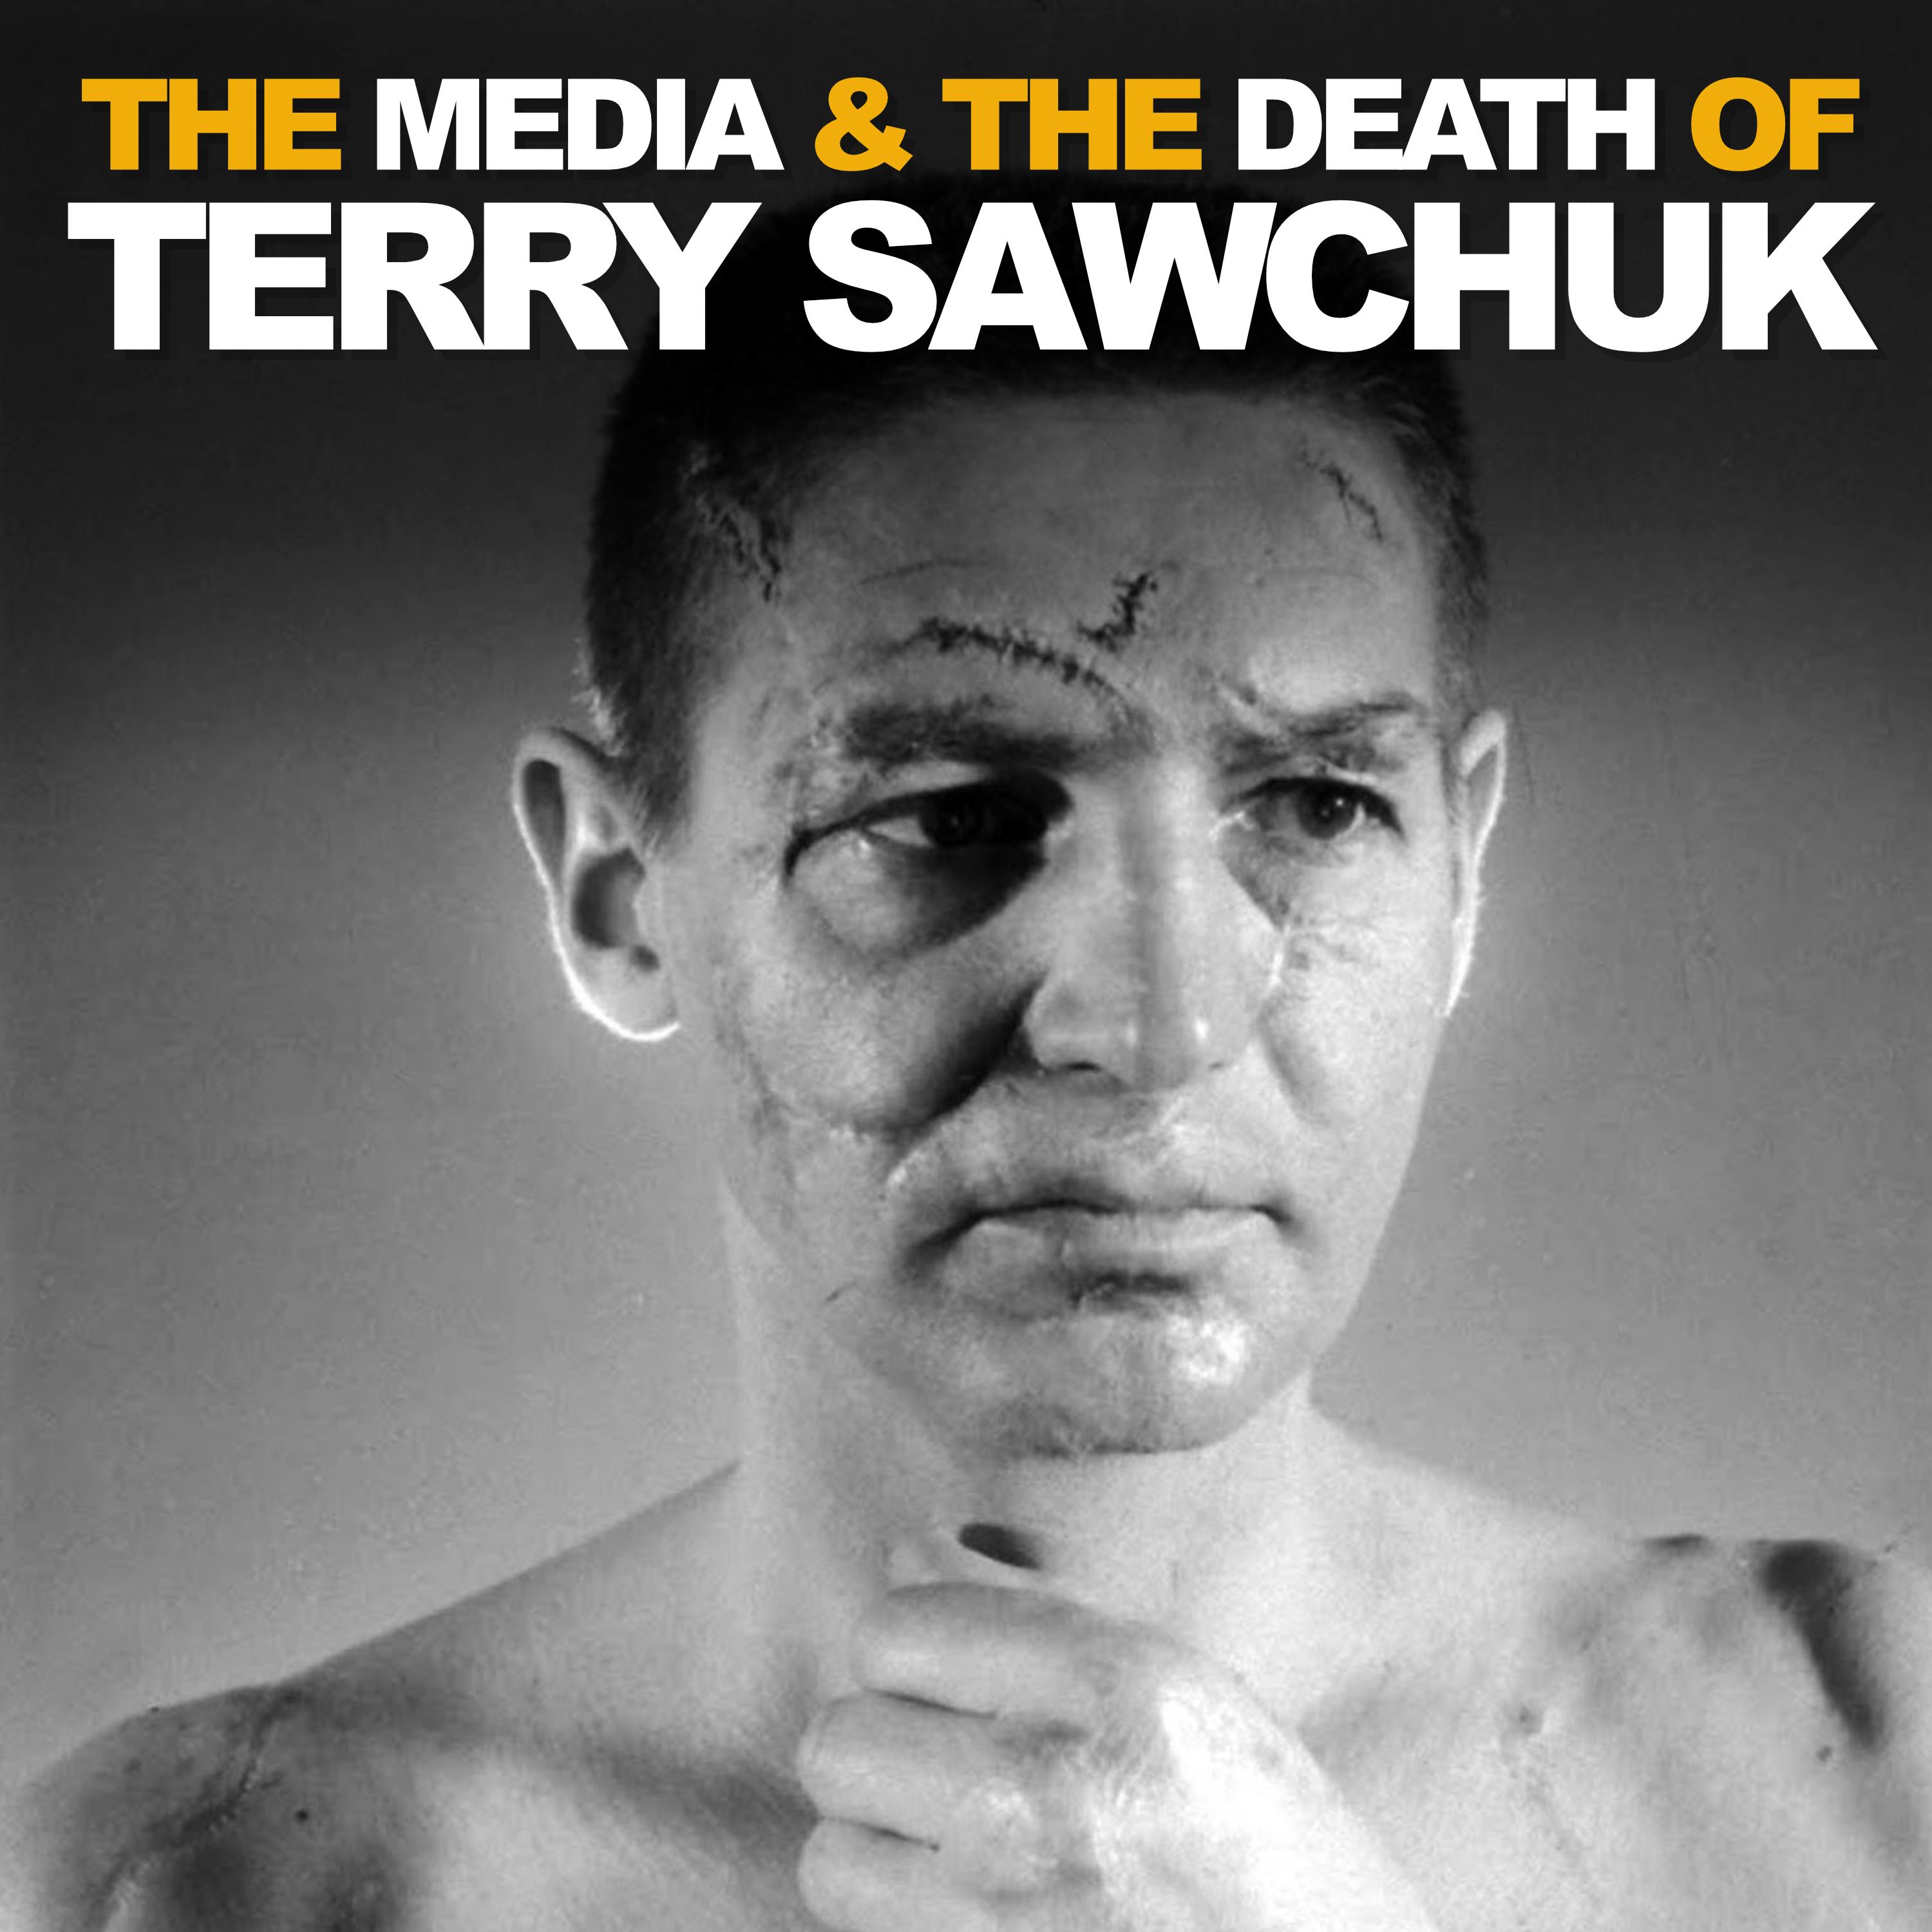 Part 3: The Media and the Death of Terry Sawchuk